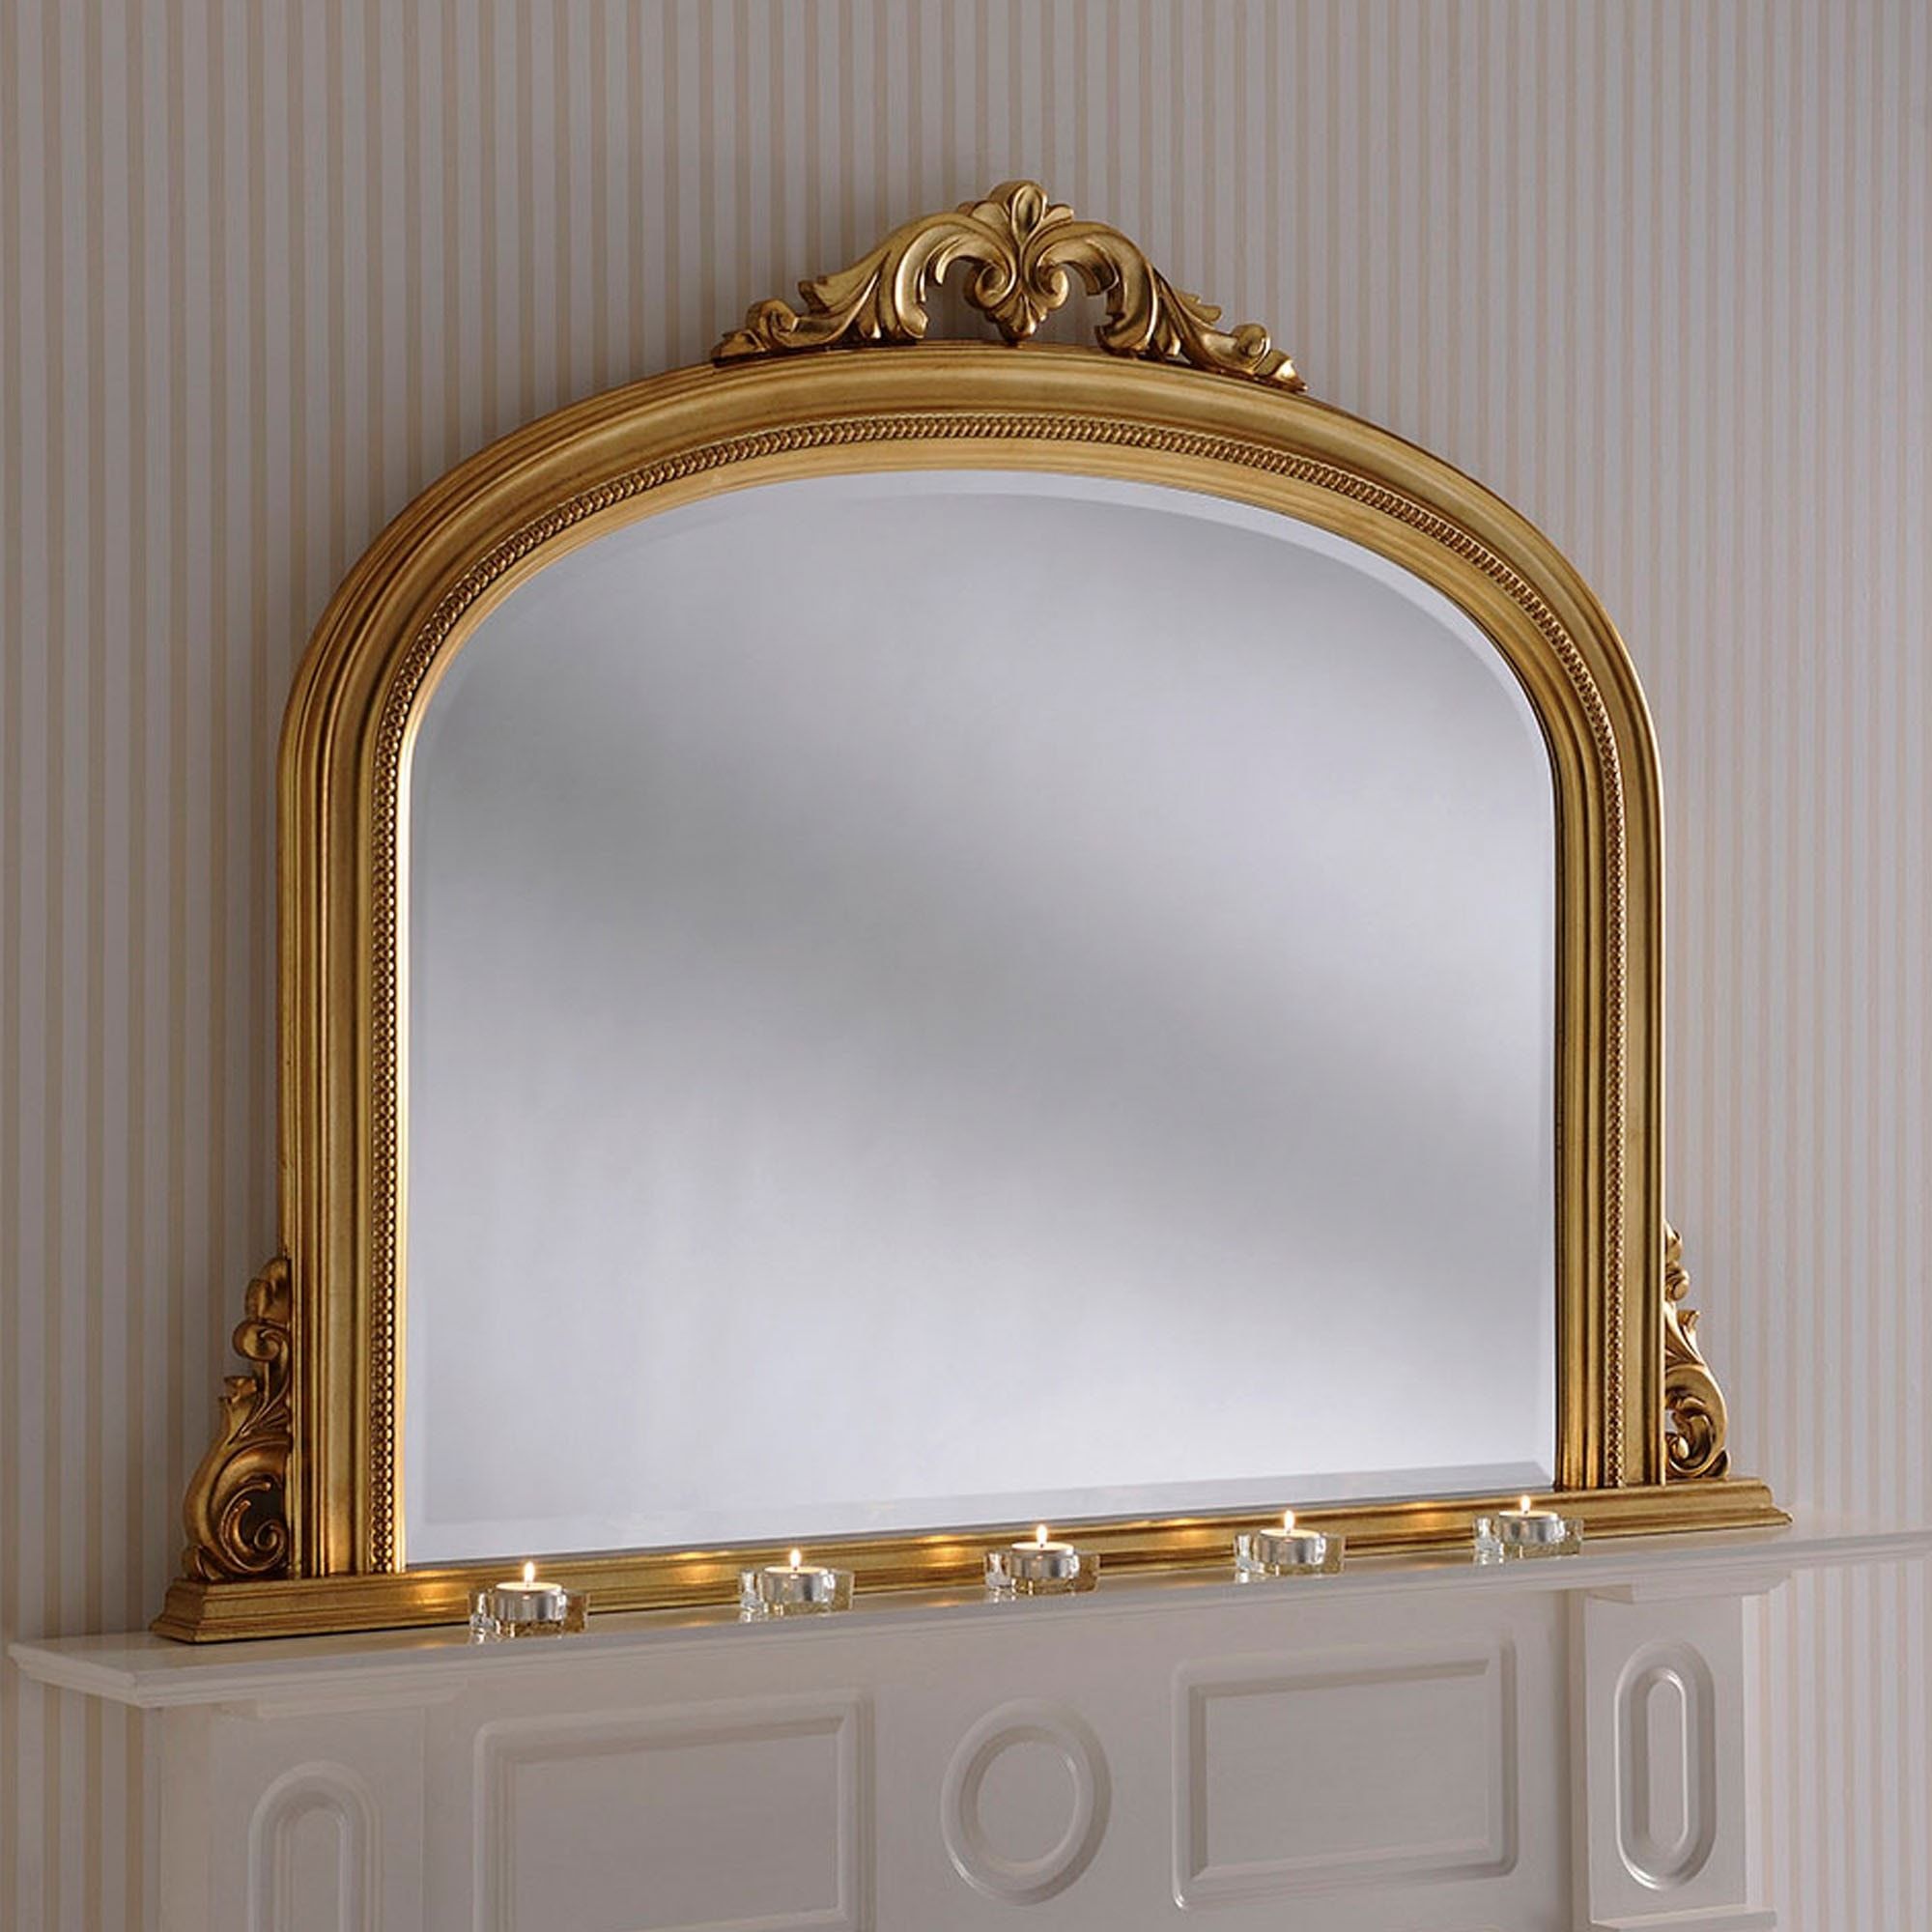 Decorative Antique French Style Gold Overmantle Mirror | Overmantle In Booth Reclaimed Wall Mirrors Accent (View 10 of 15)